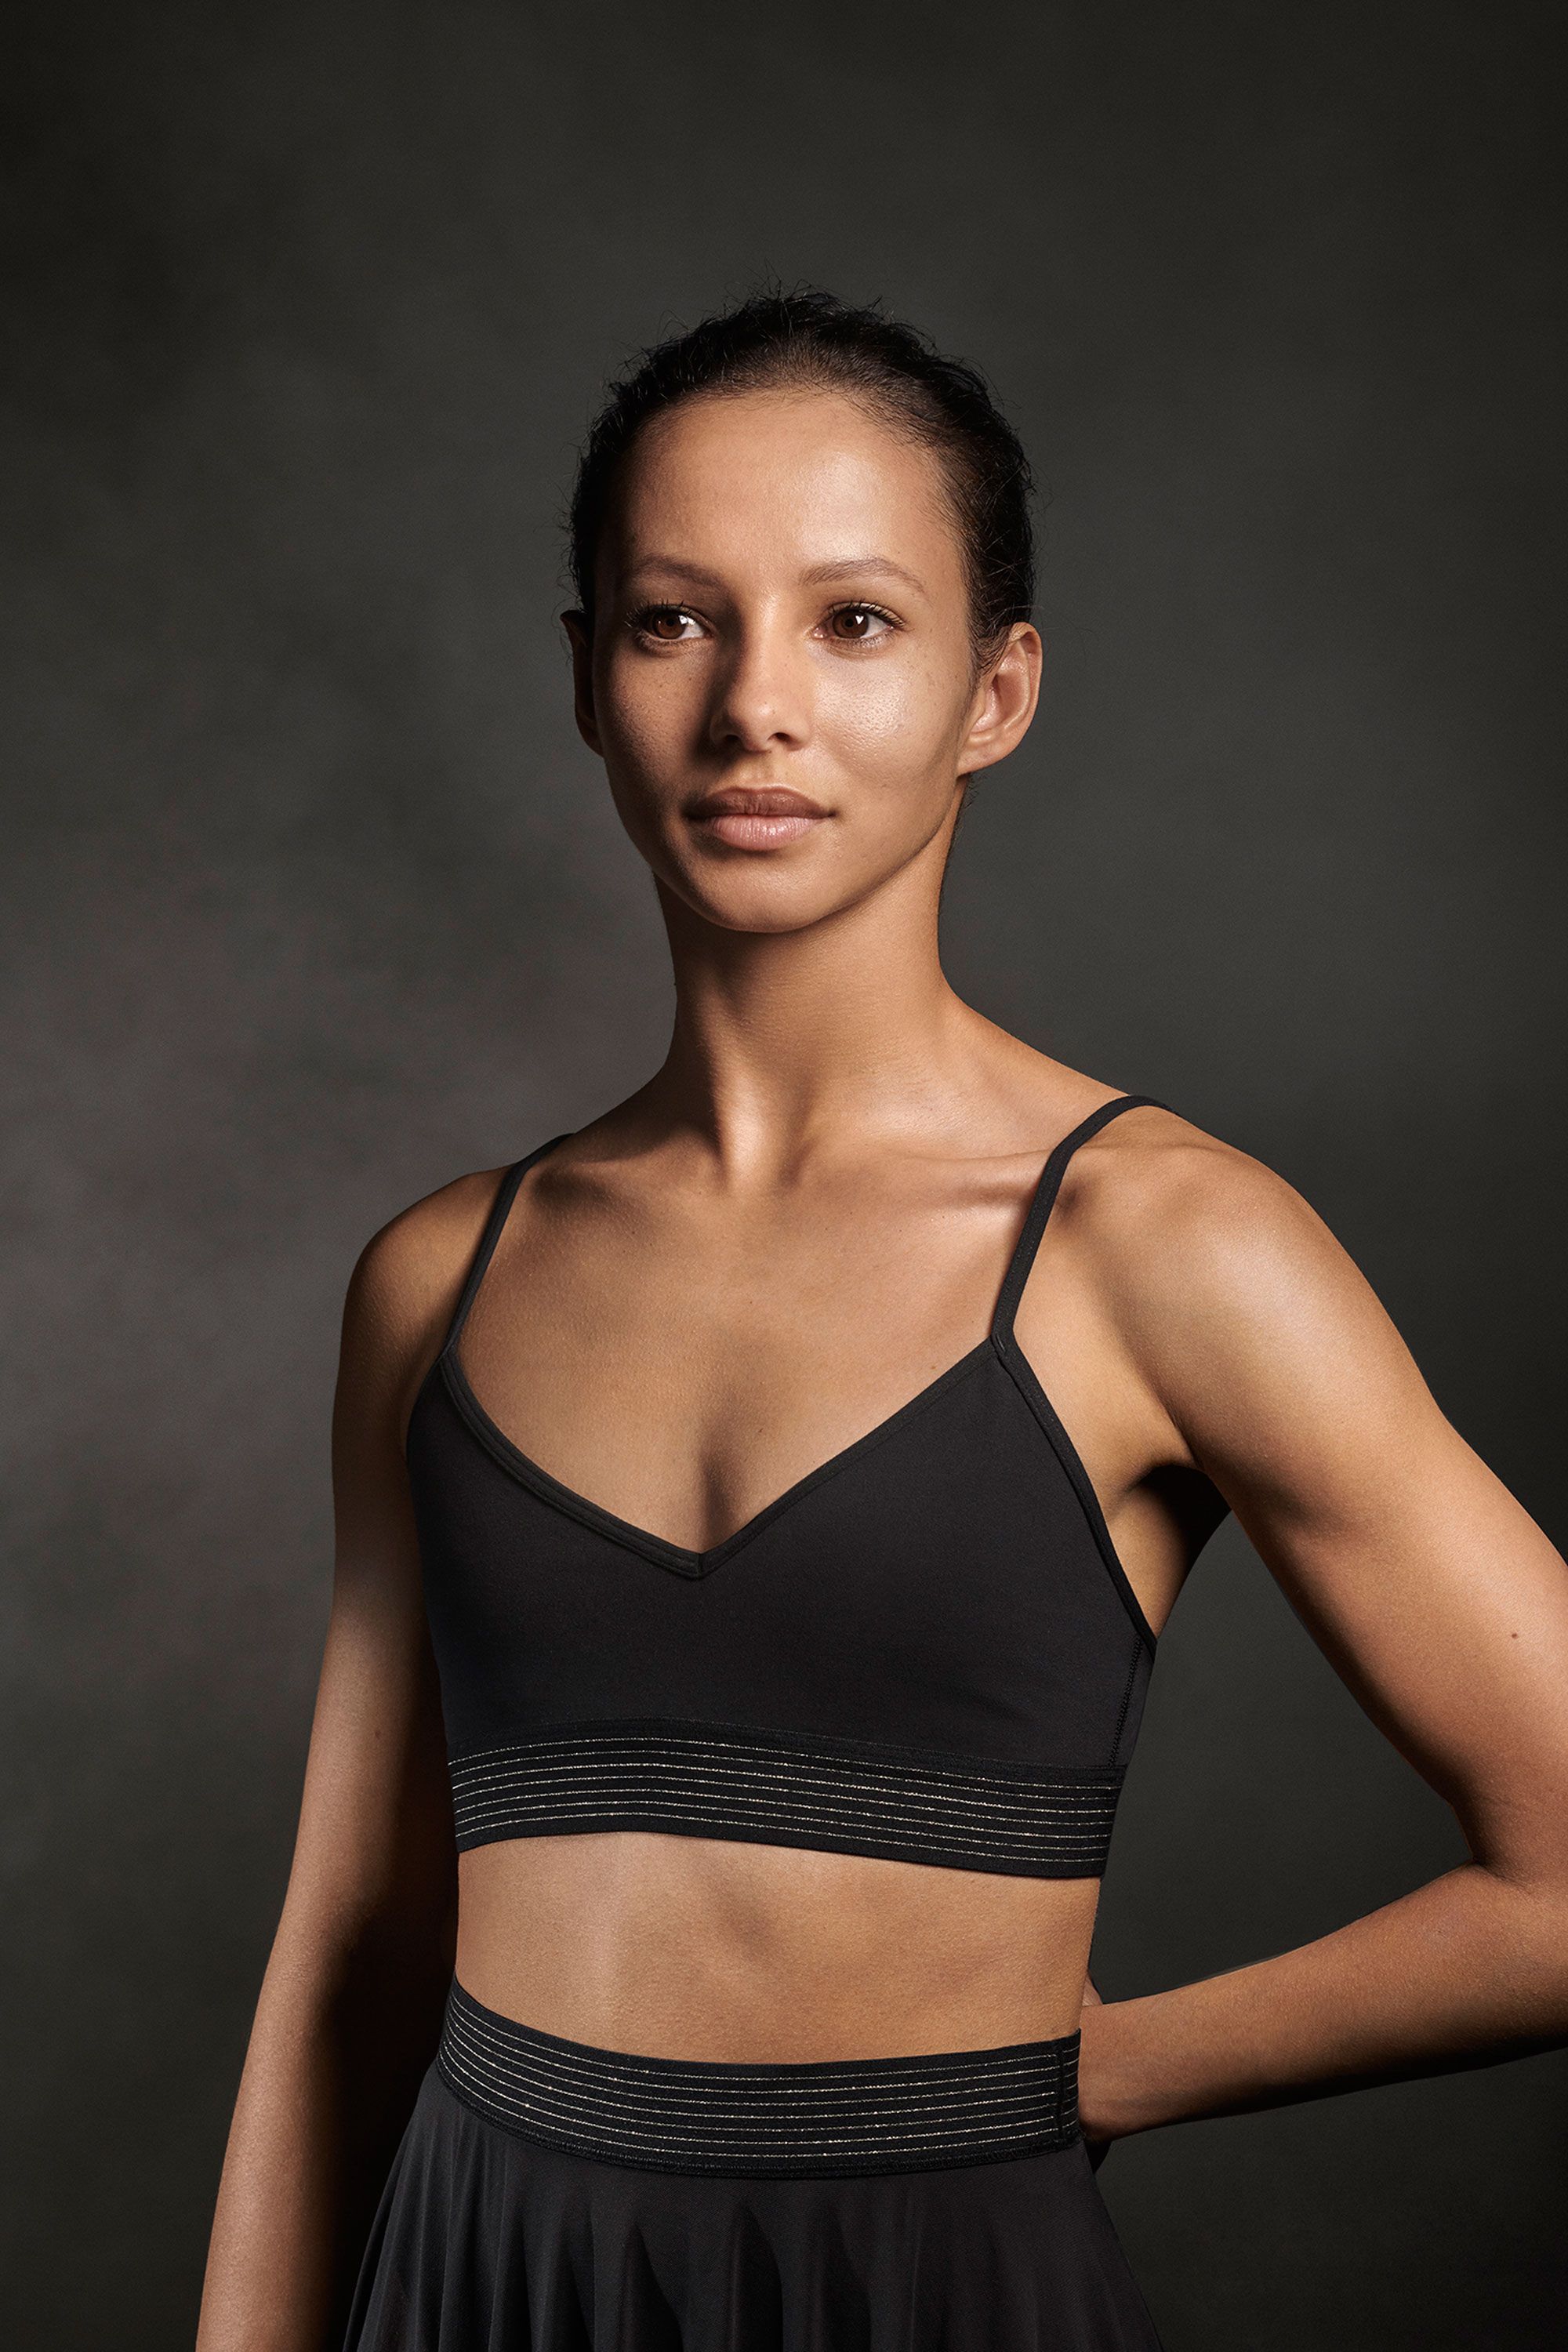 Lululemon Have A New Dance Collection 